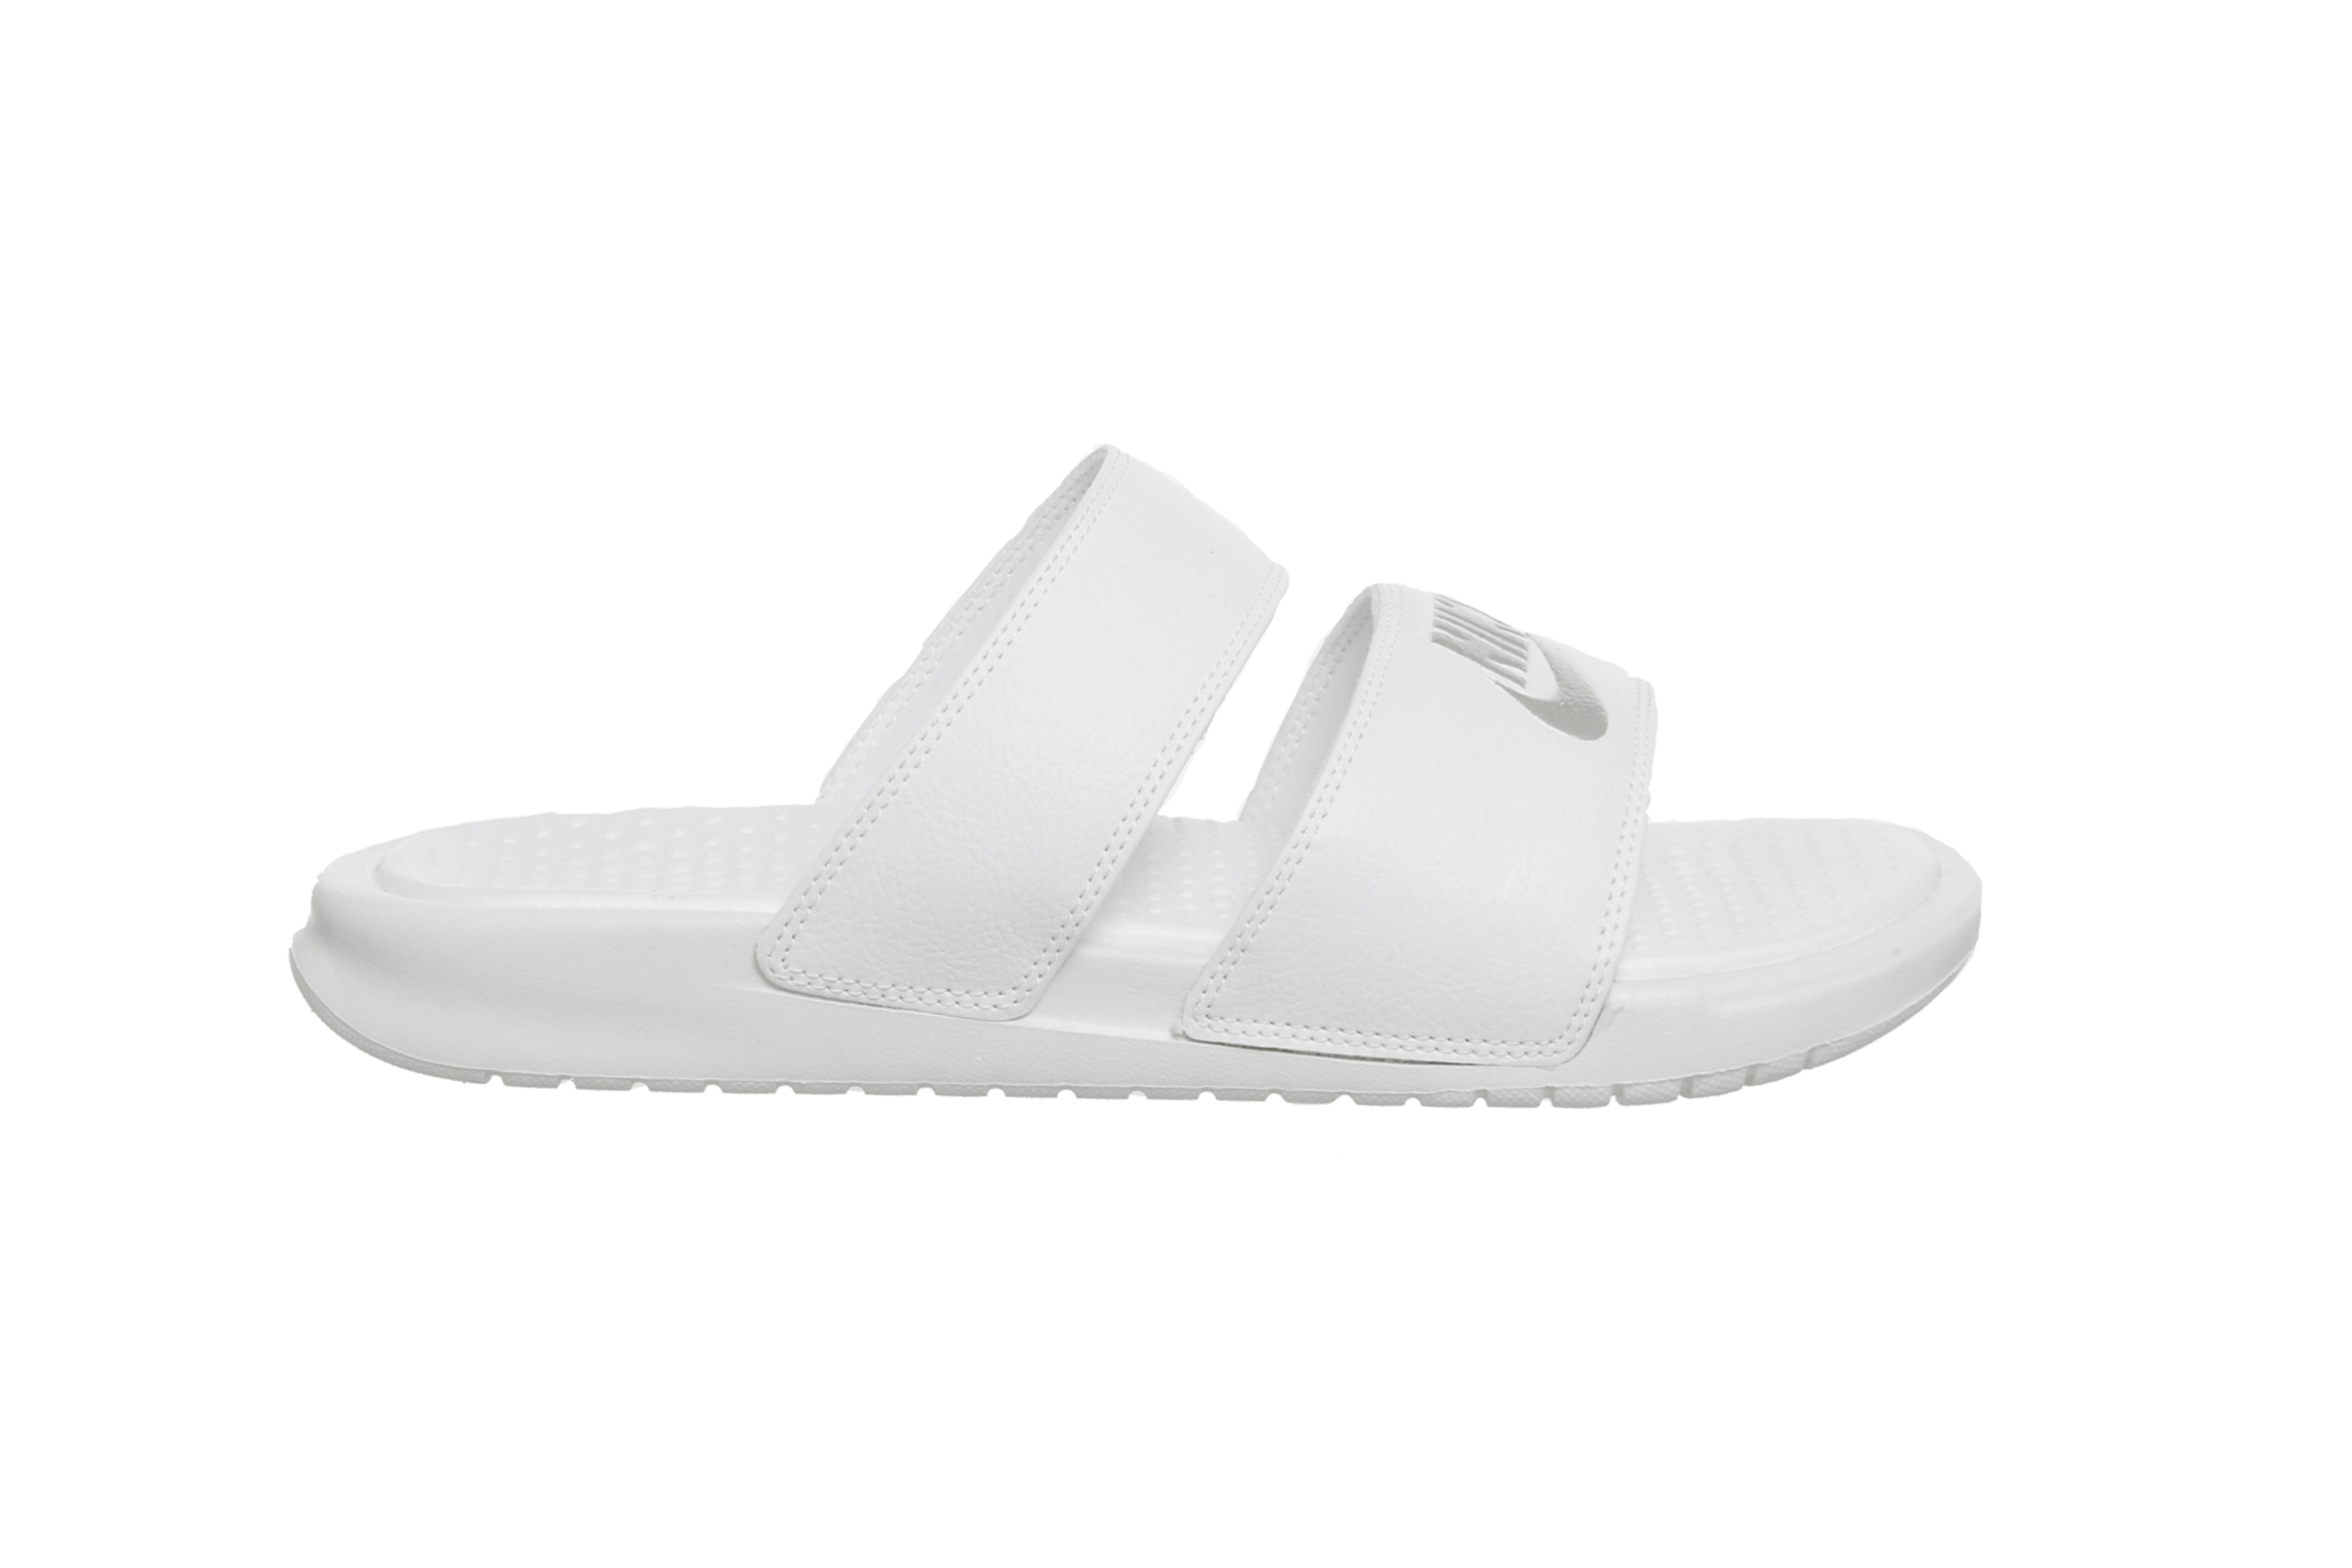 Nike Summer Double Strap Slides in White/Black Sandals Shoes